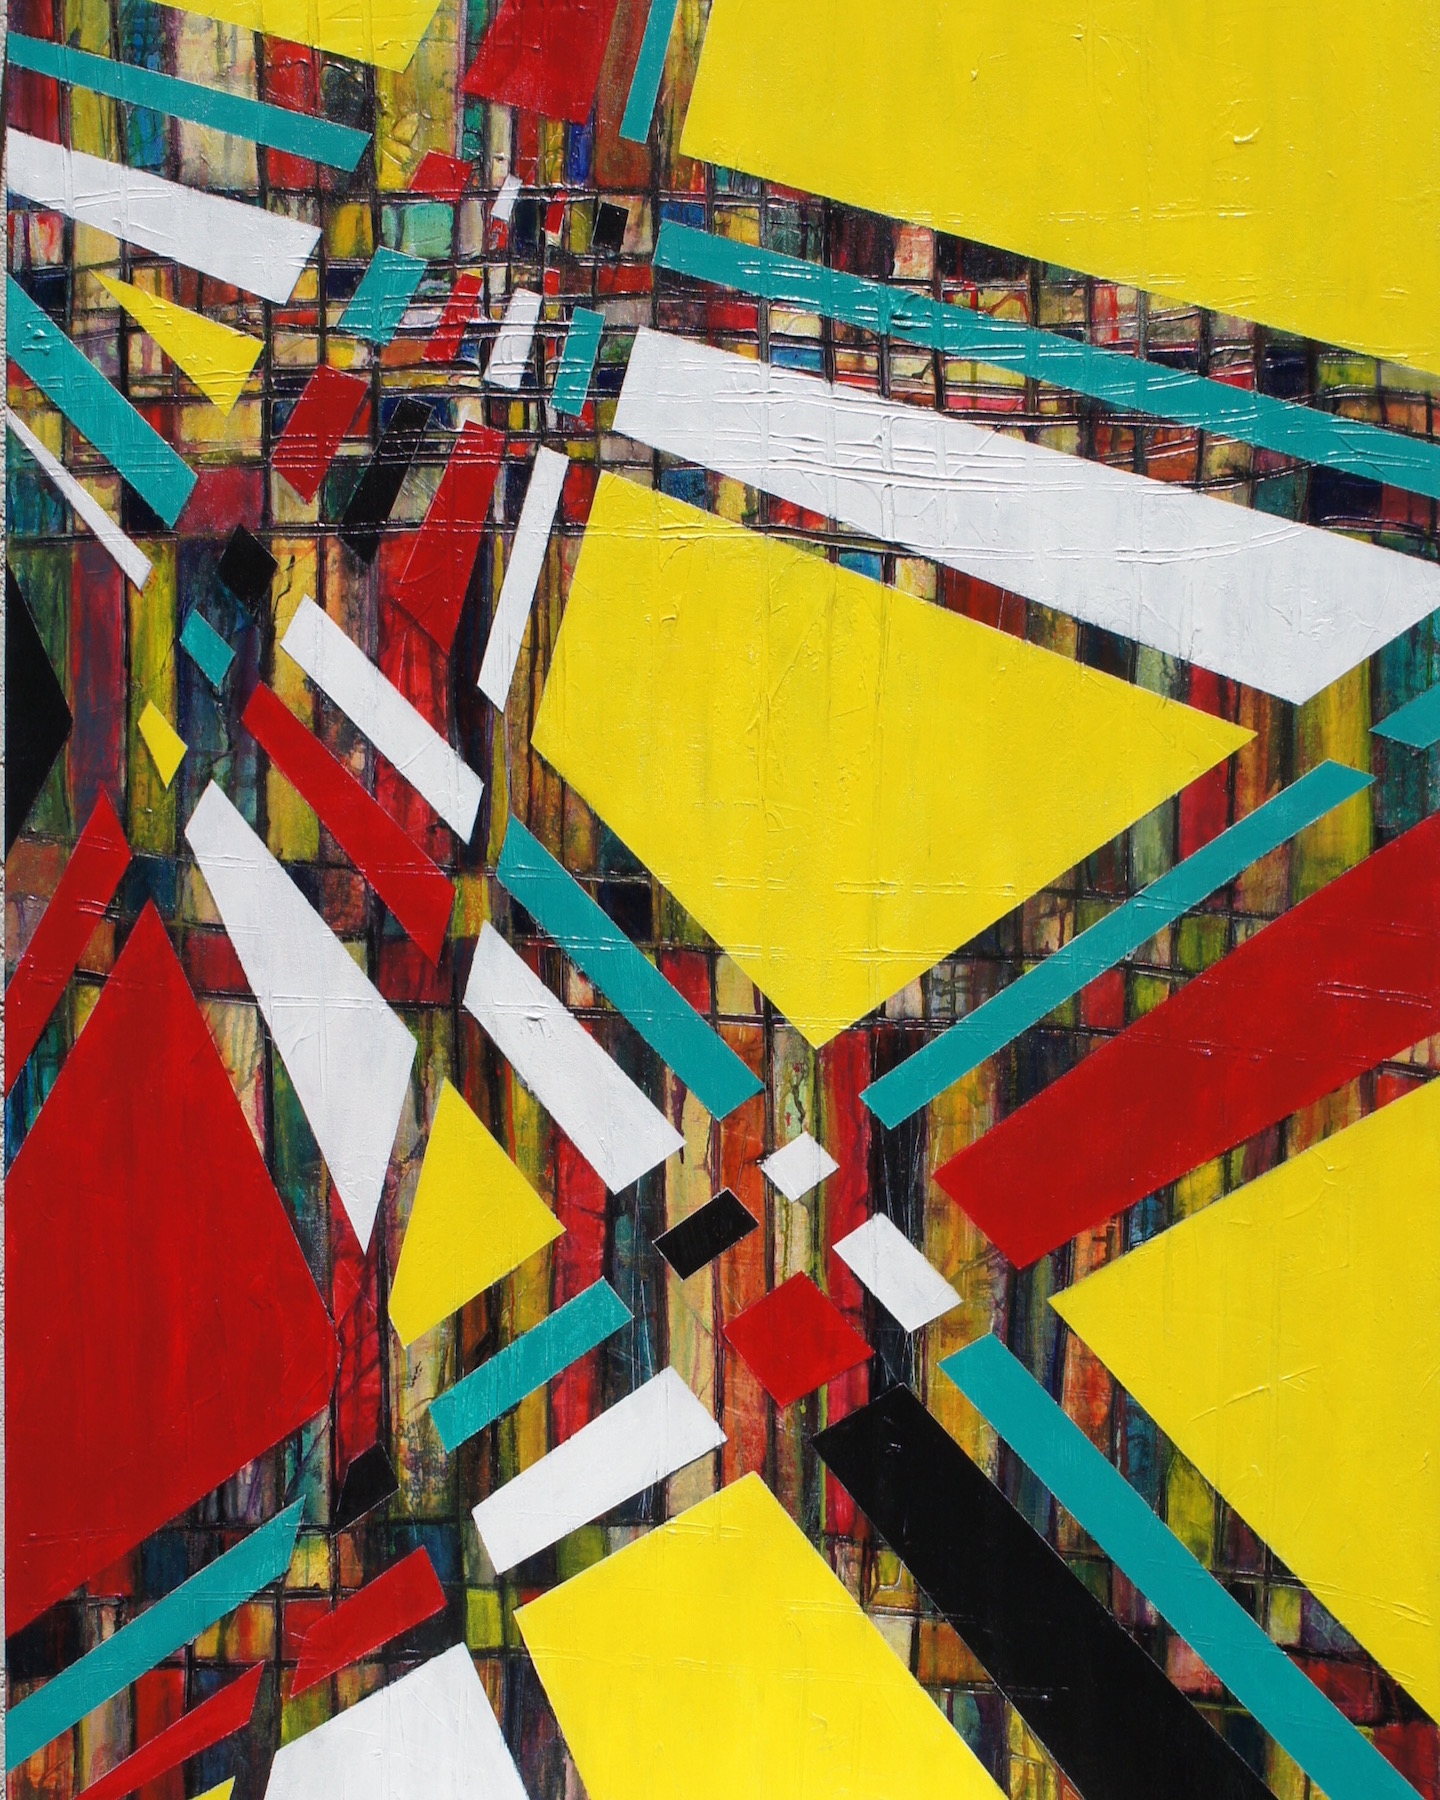 "City Runways" by Susie Stockholm, 50 x 40", acrylic on canvas SOLD!